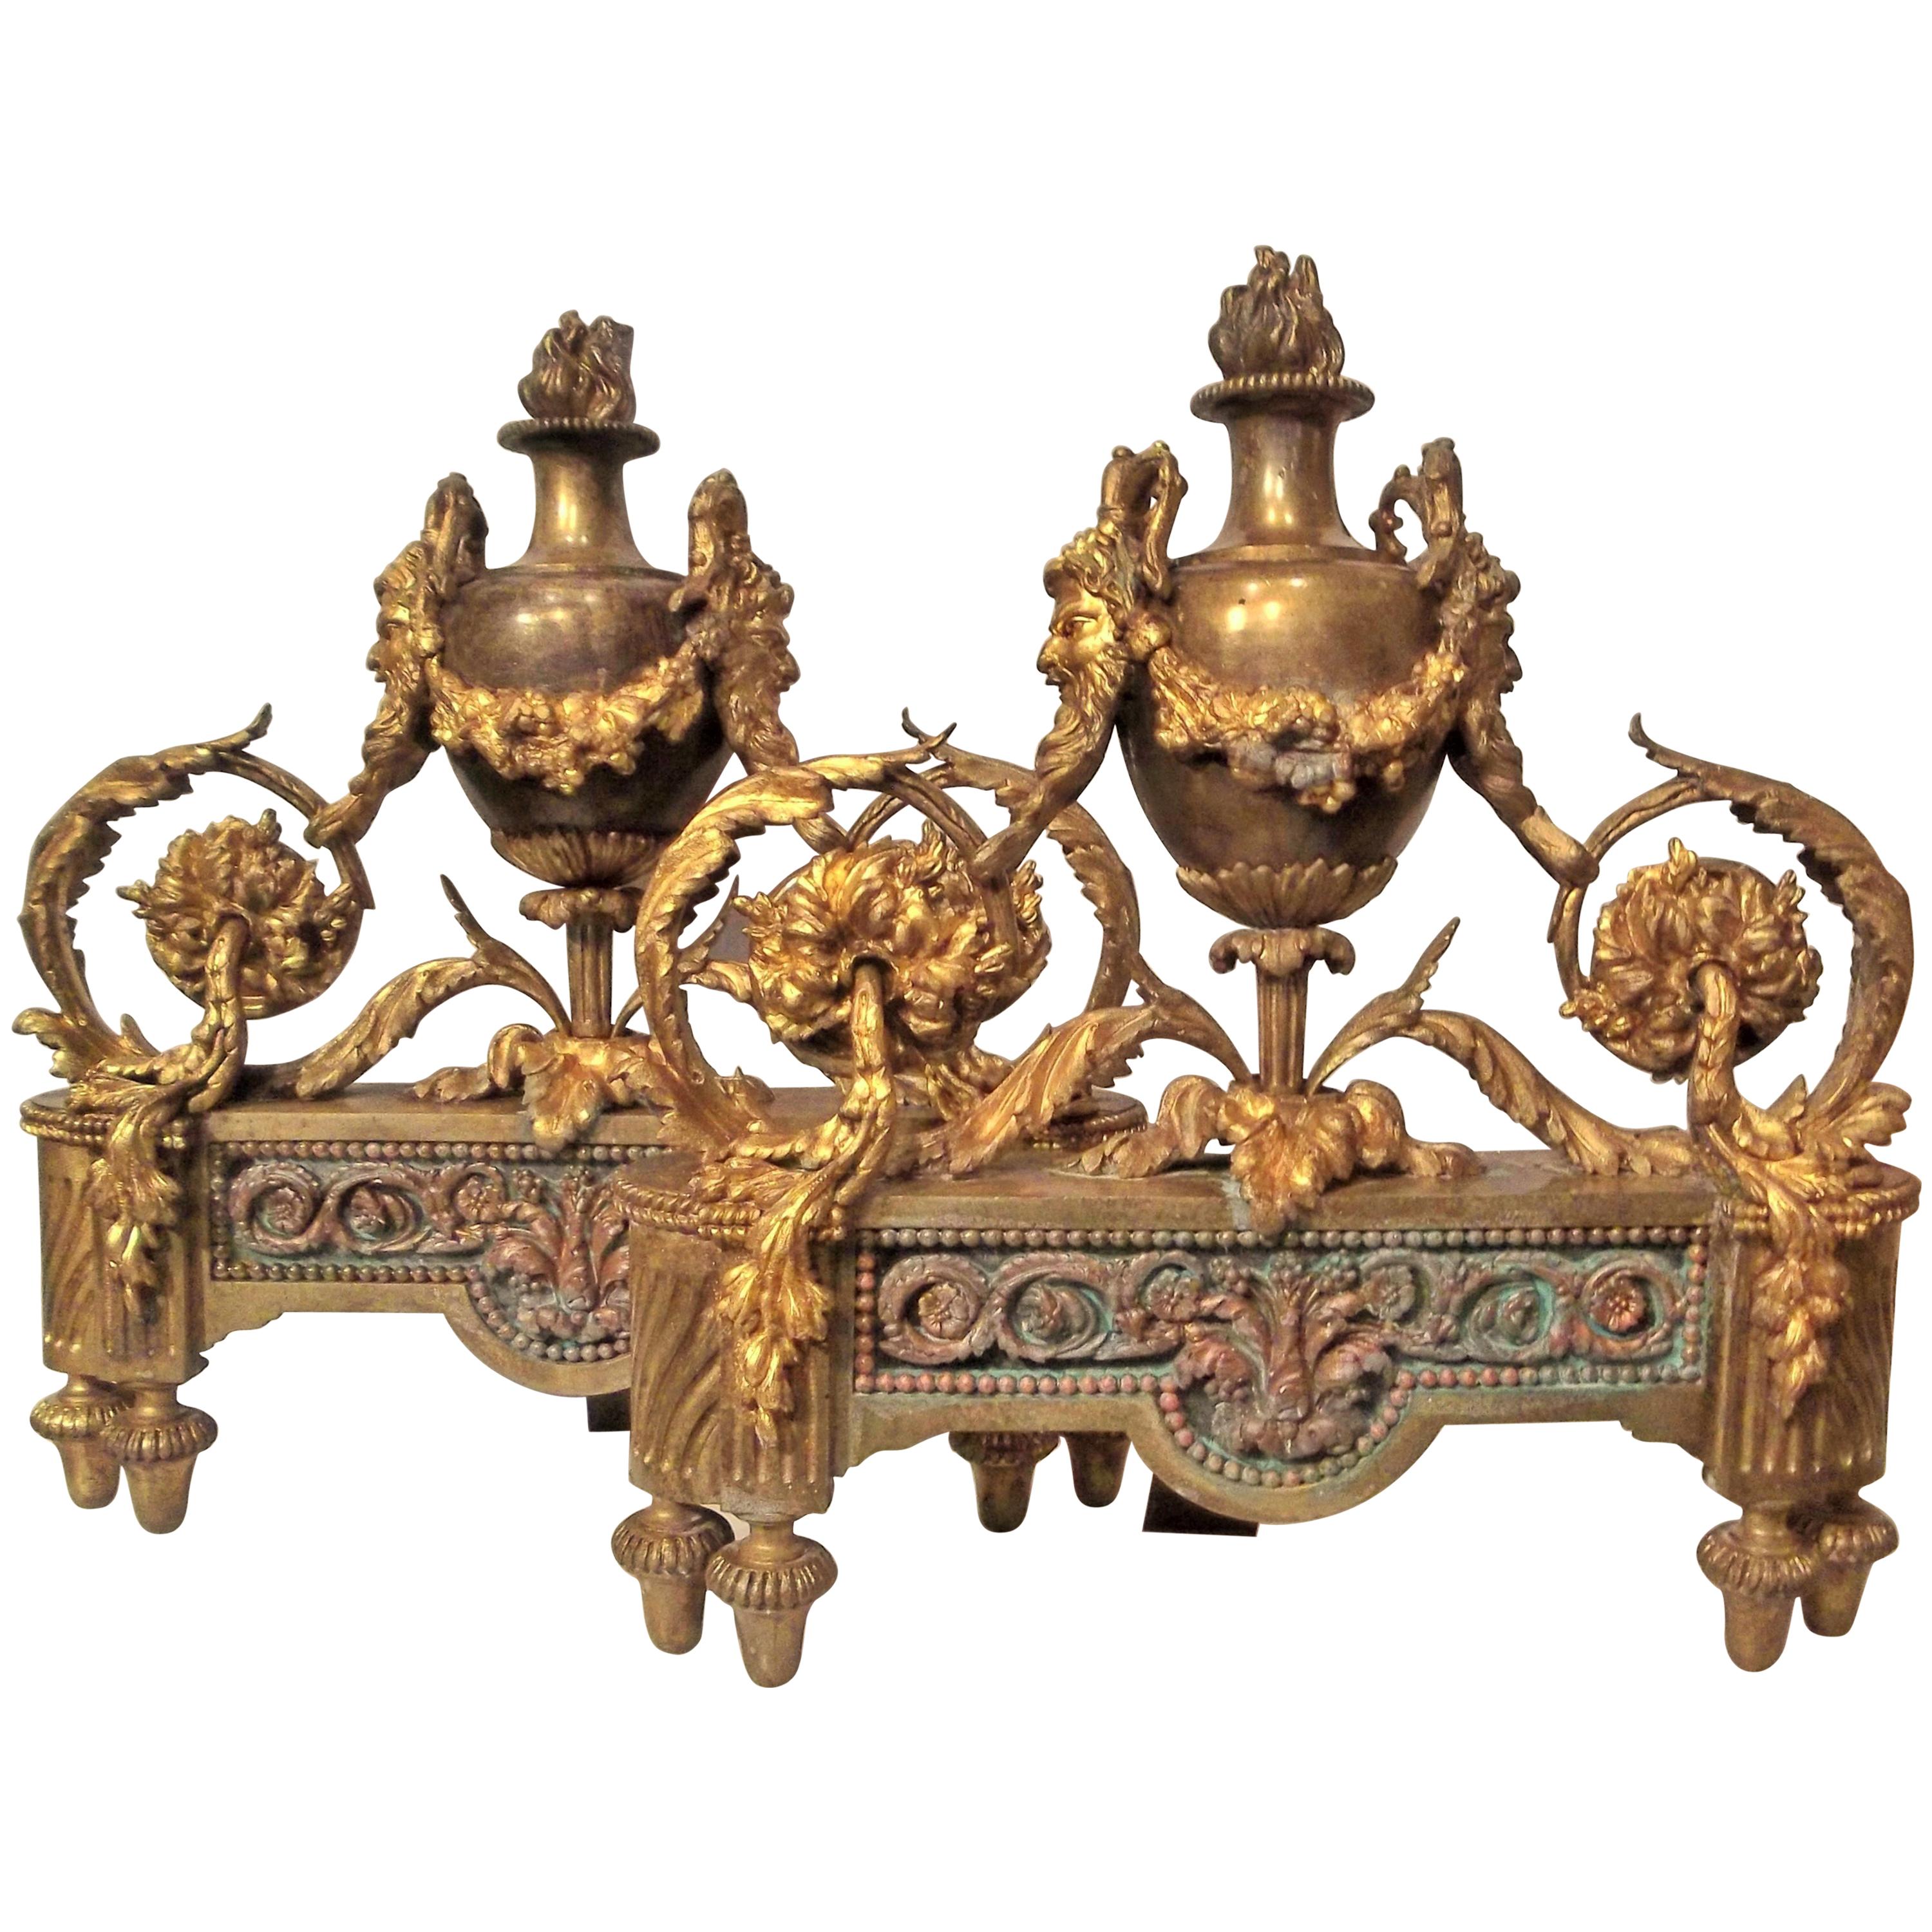 Pair of Louis XVI Style Bronze and Gilt Bronze Chenets or Andirons